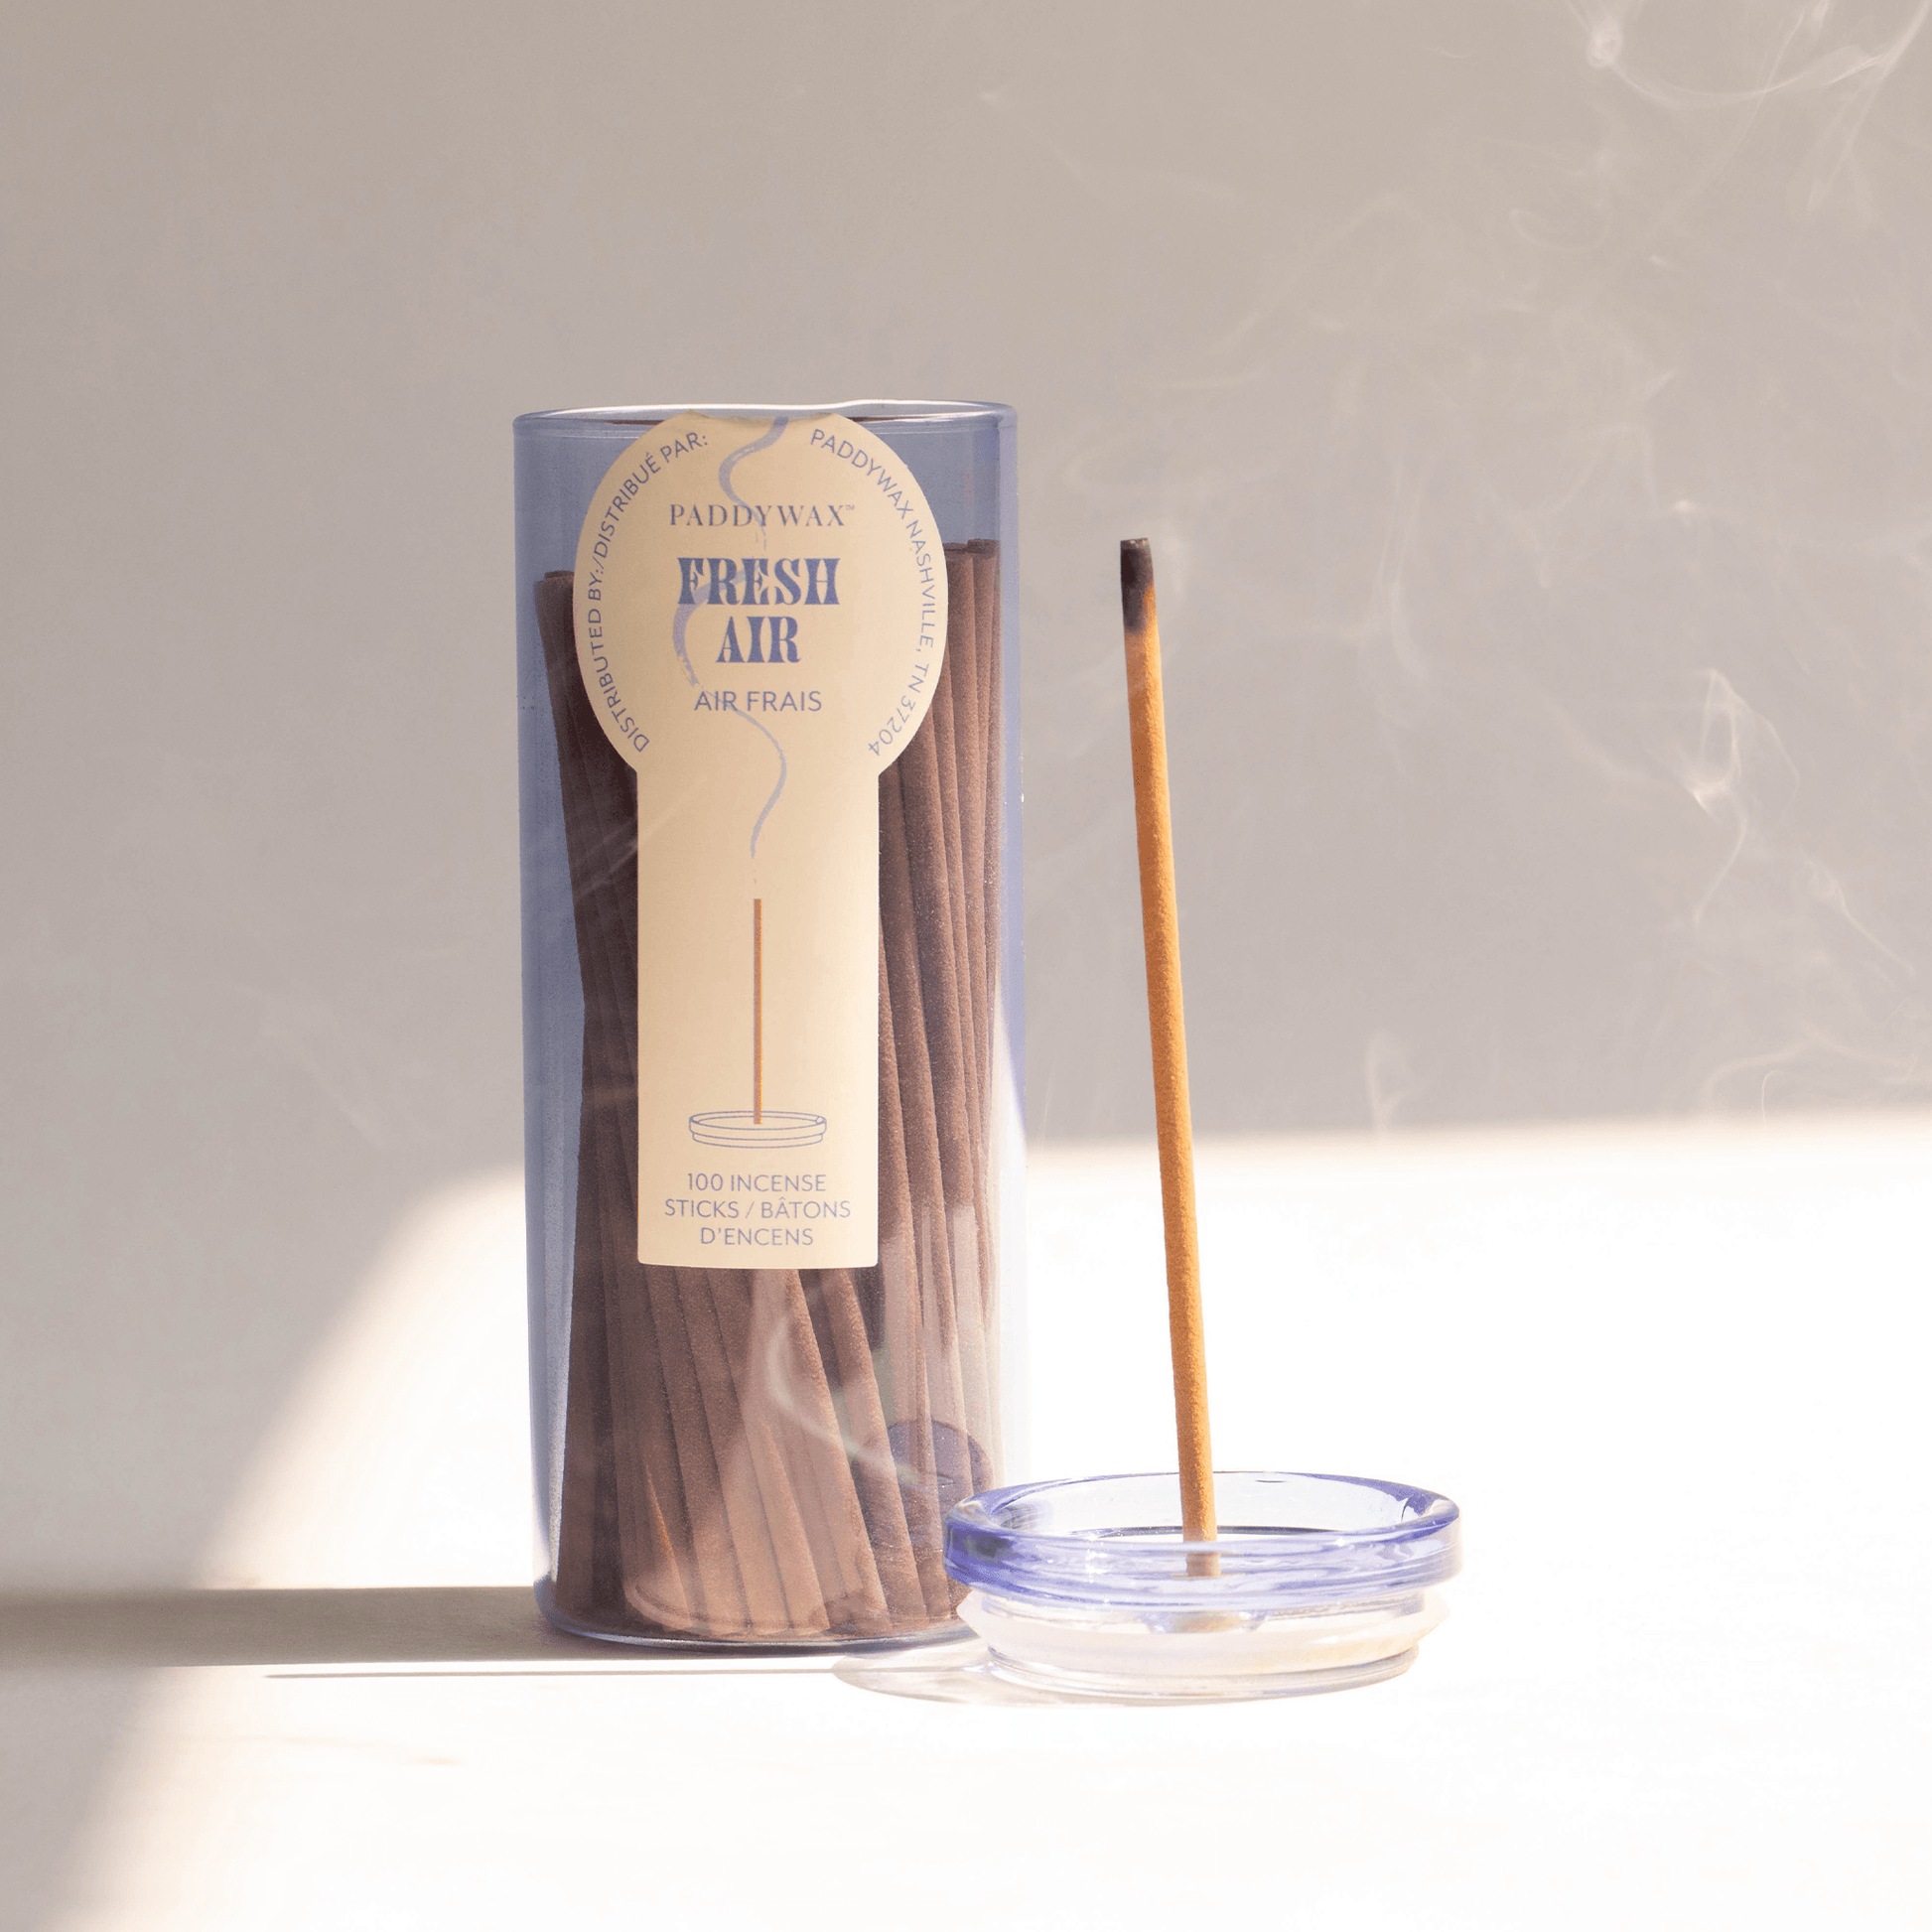 Blue glass cylinder with white label holding 100 incense sticks for flameless fragrance; pictured next to burning incense stick